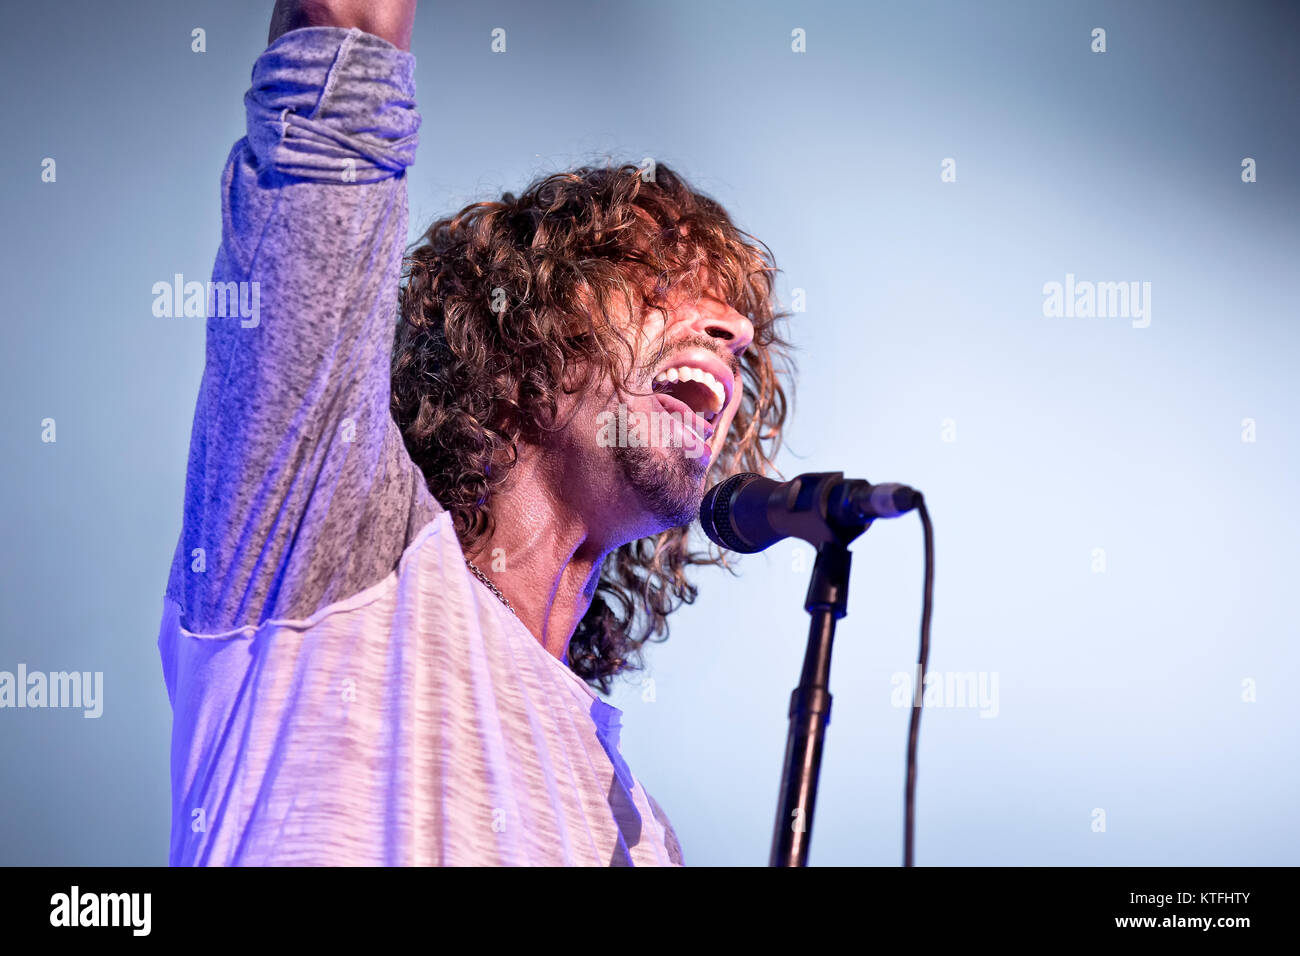 Soundgarden, the American rock and grunge band, performs a live concert at Spektrum in Oslo. Here lead singer and guitarist Chris Cornell is seen live on stage. Norway, 07/09 2013. Stock Photo